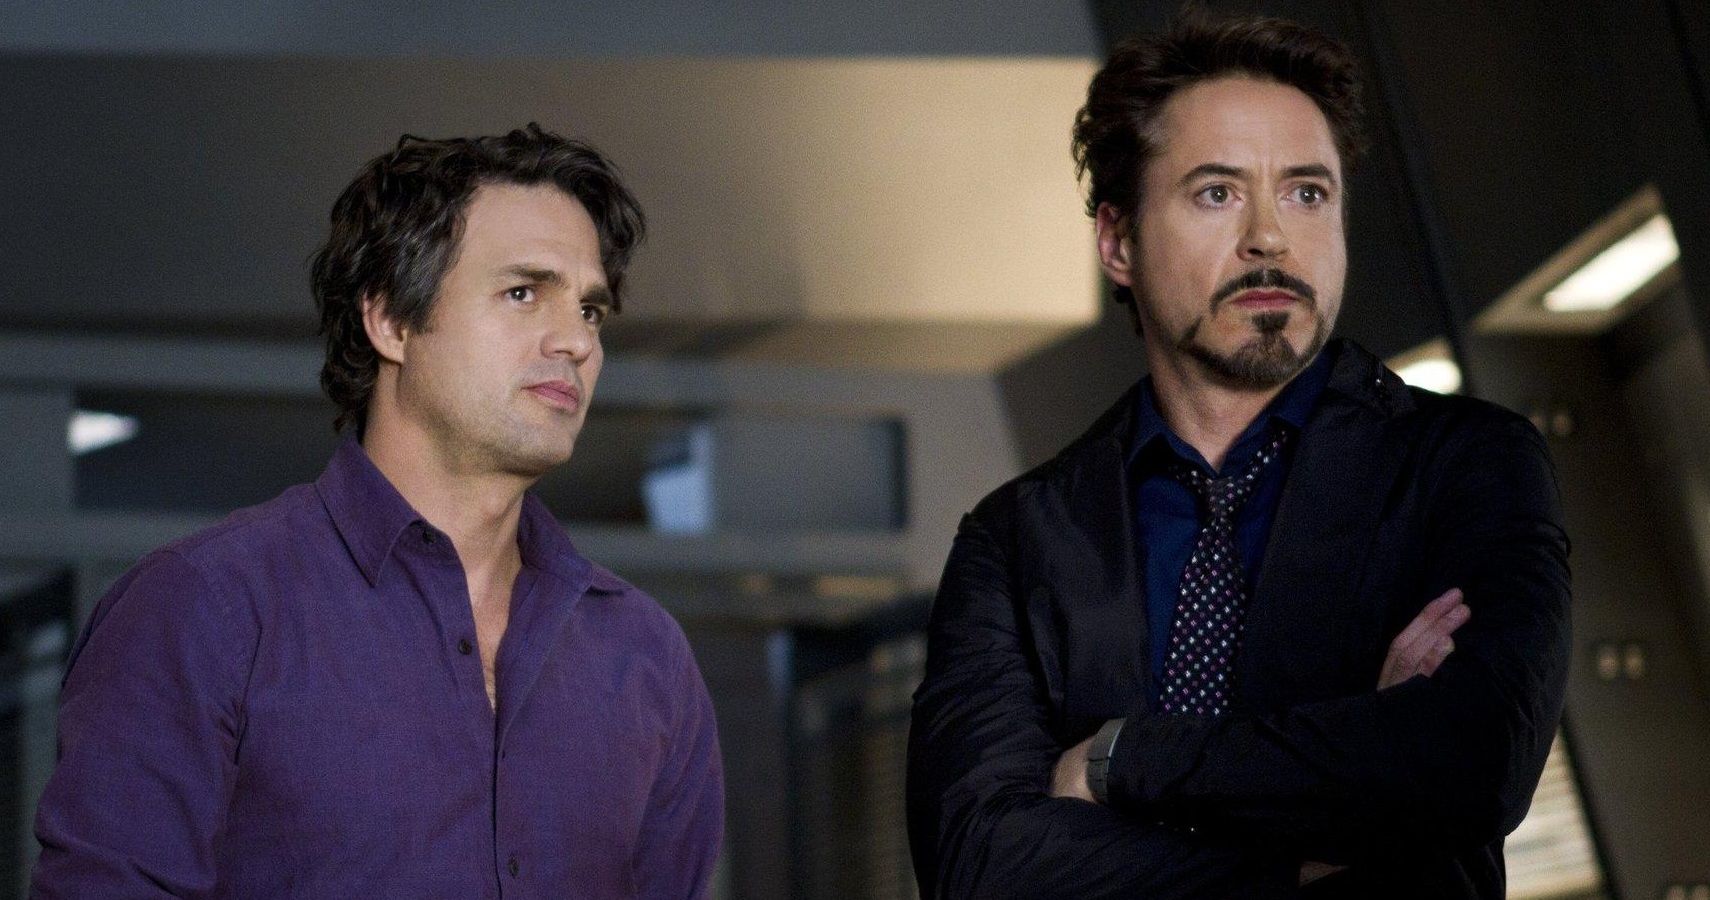 Tony-Stark-and-Bruce-Banner-in-The-Avengers-